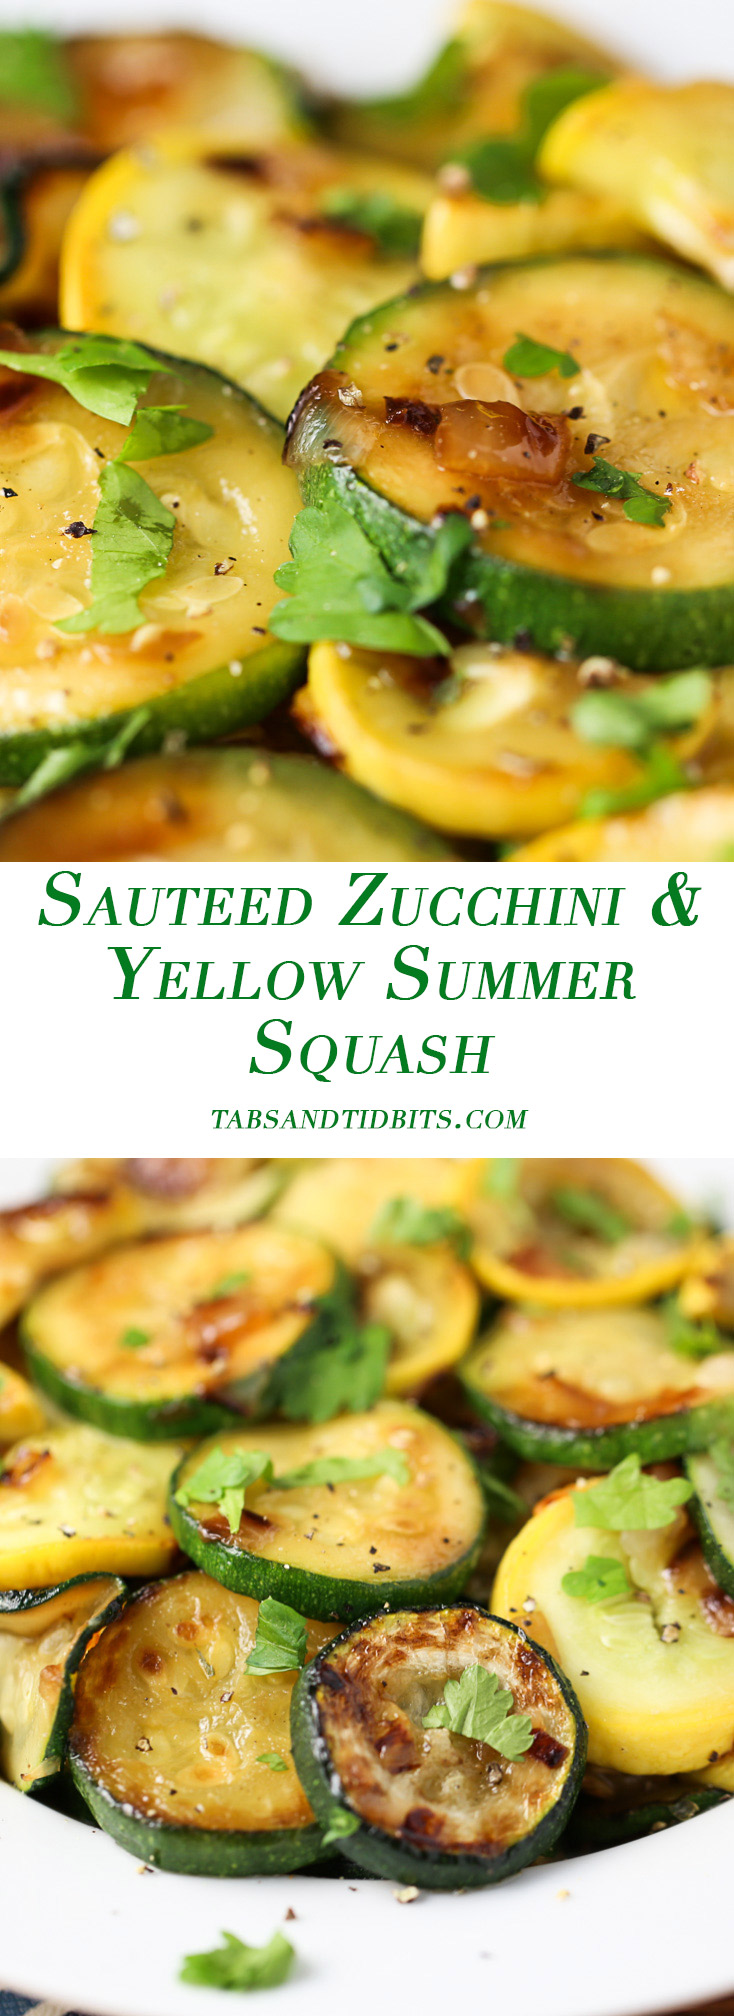 Sauteed Zucchini & Yellow Summer Squash - Sauteed squash that is full of flavor and browned texture due to salting.